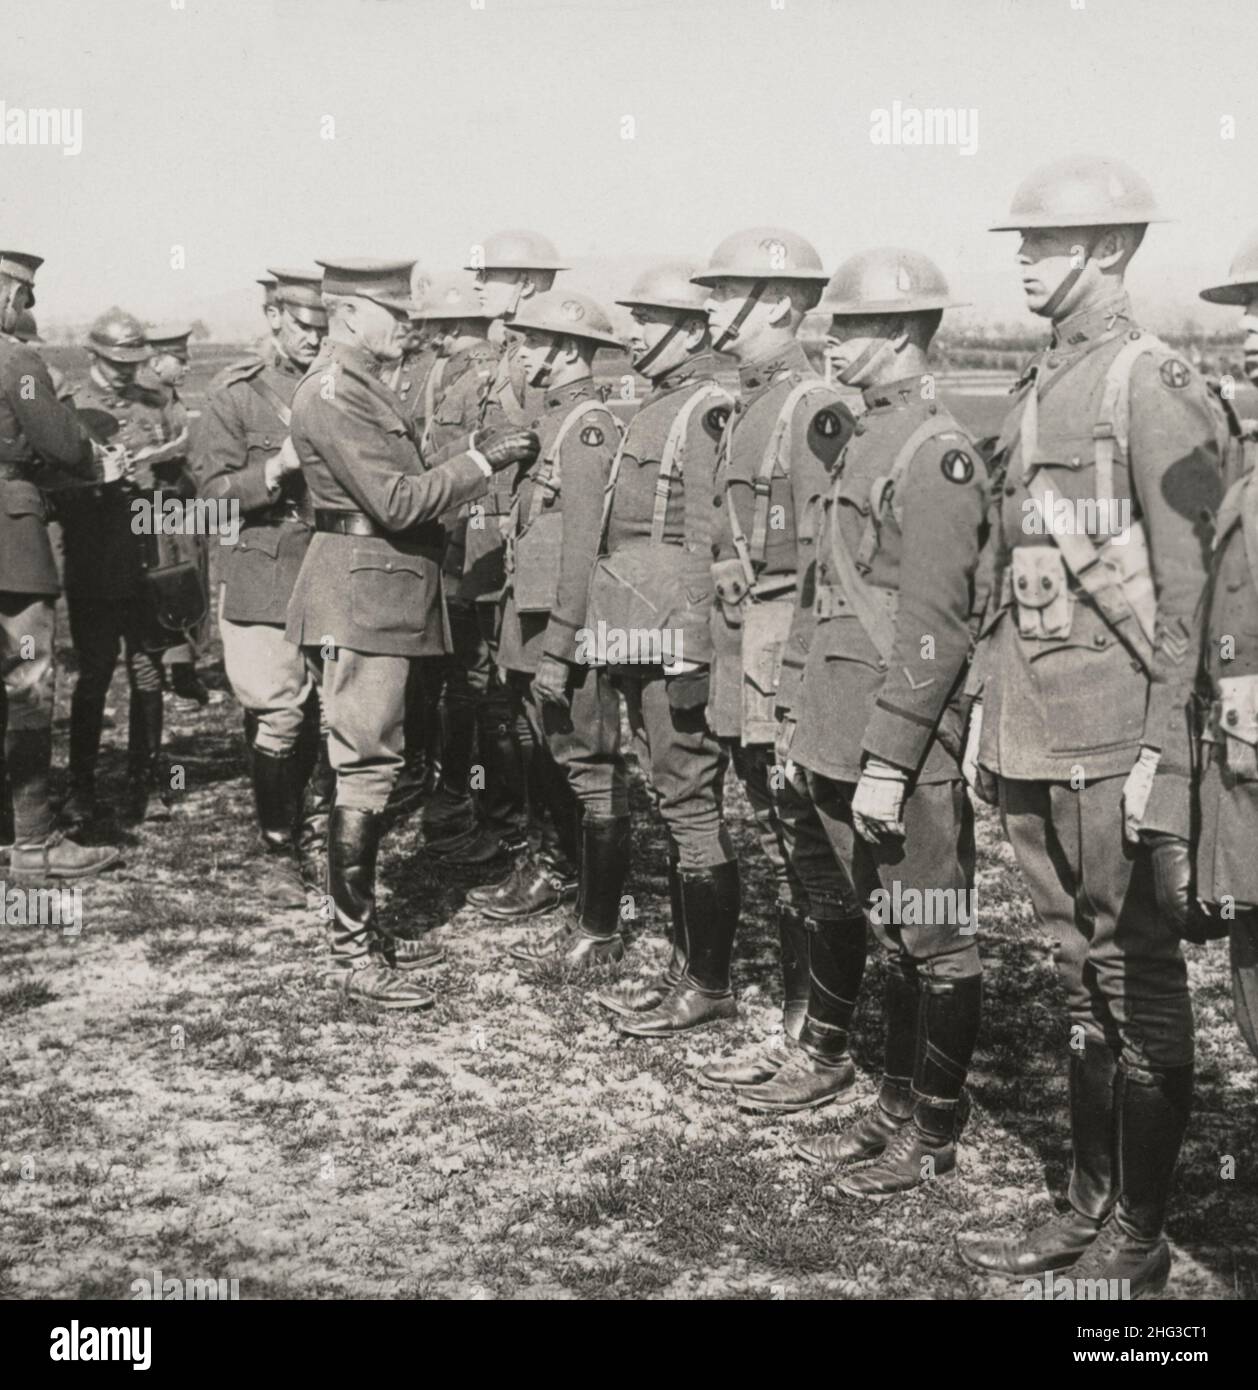 First World War period. Vintage photo of General Pershing decorating officers of 89th Division, Treves, Germany. 1917-1918 Stock Photo